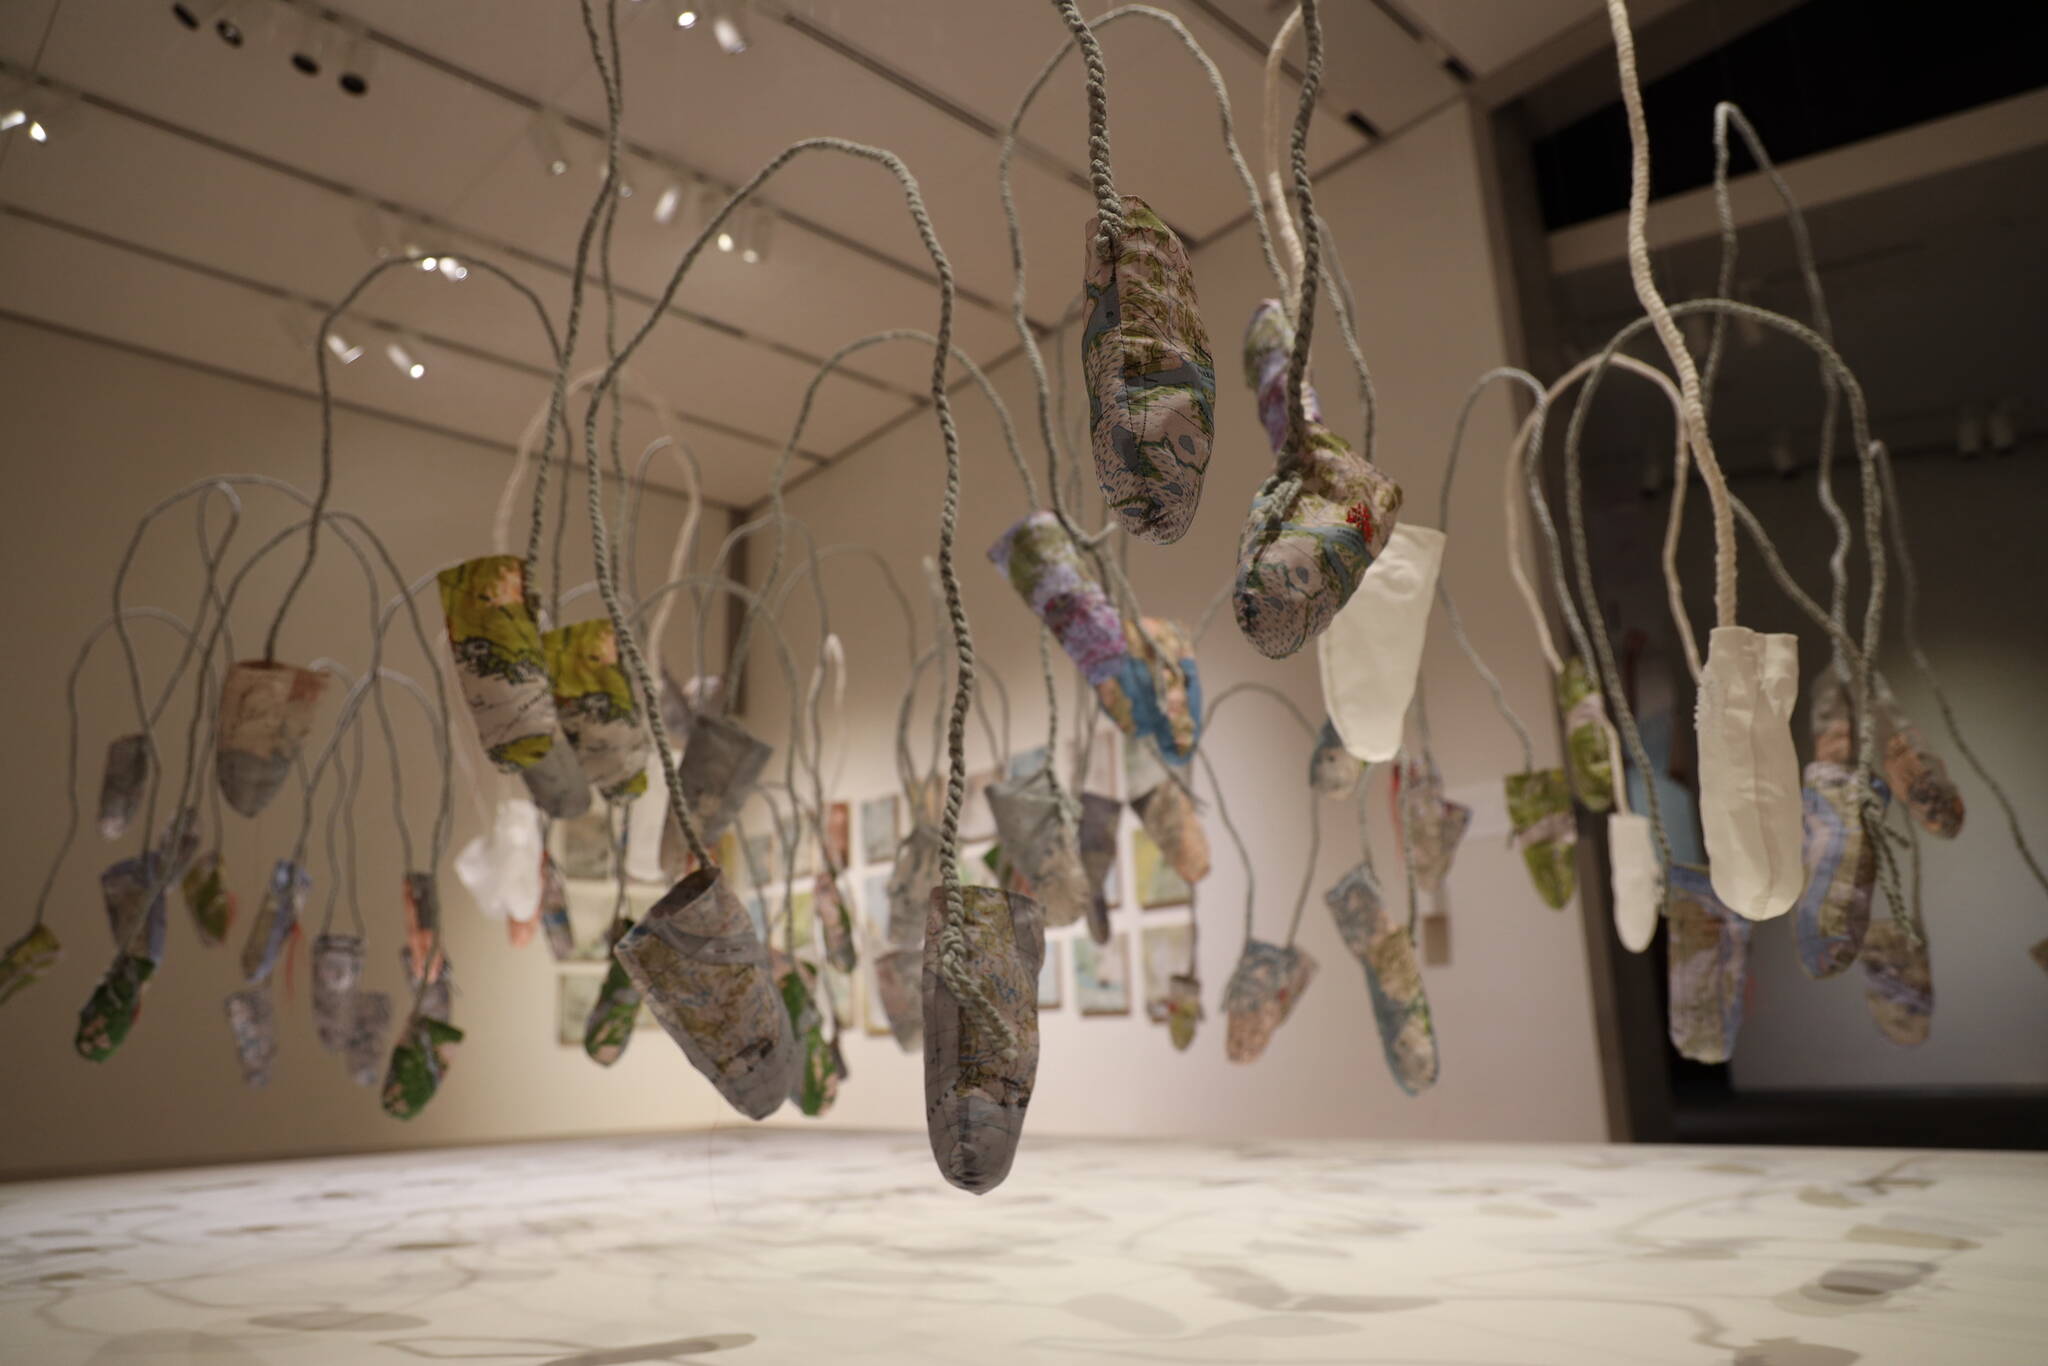 The series “Credible, Idiot Strings” features cotton fabric, nylon thread and steel wire to draw attention to the high rates of suicide in Alaska Native and Indigenous communities. The series is a part of the new exhibition “Visceral: Verity” on display at the Alaska State Museum. (Clarise Larson / Juneau Empire)